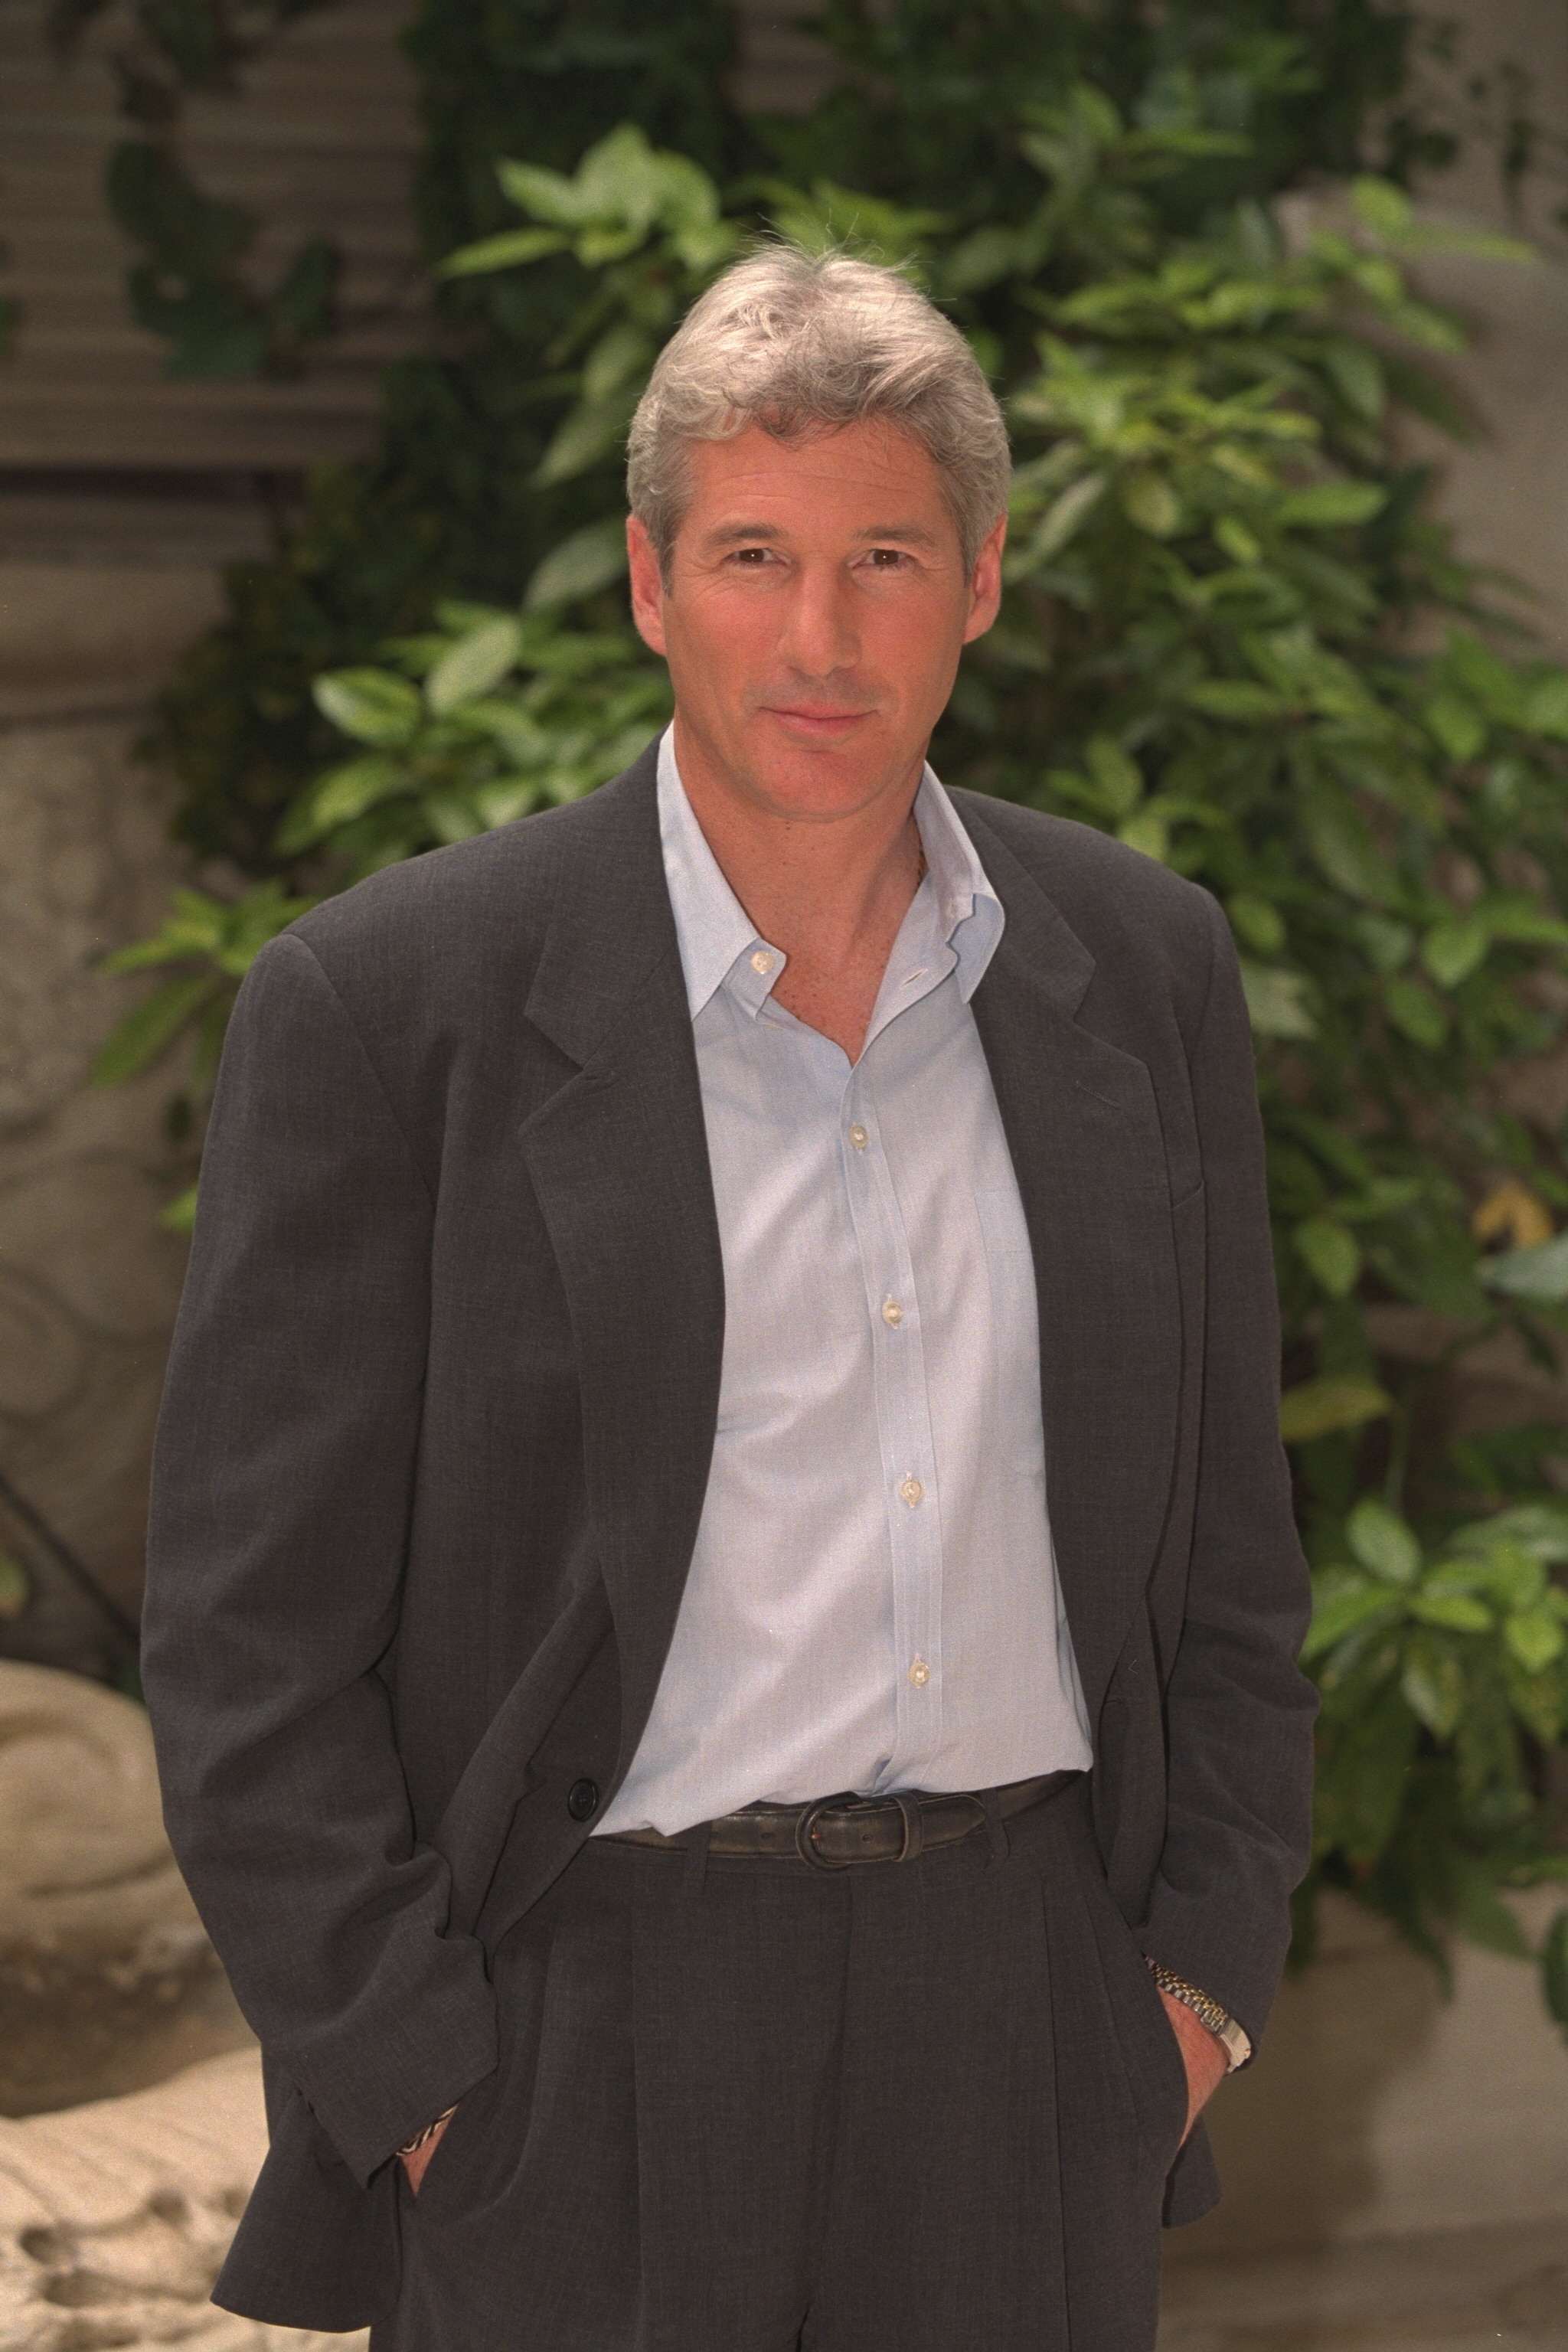 Richard Gere during the promotion of a movie in Paris, France on May 27, 1998 | Source: Getty Images